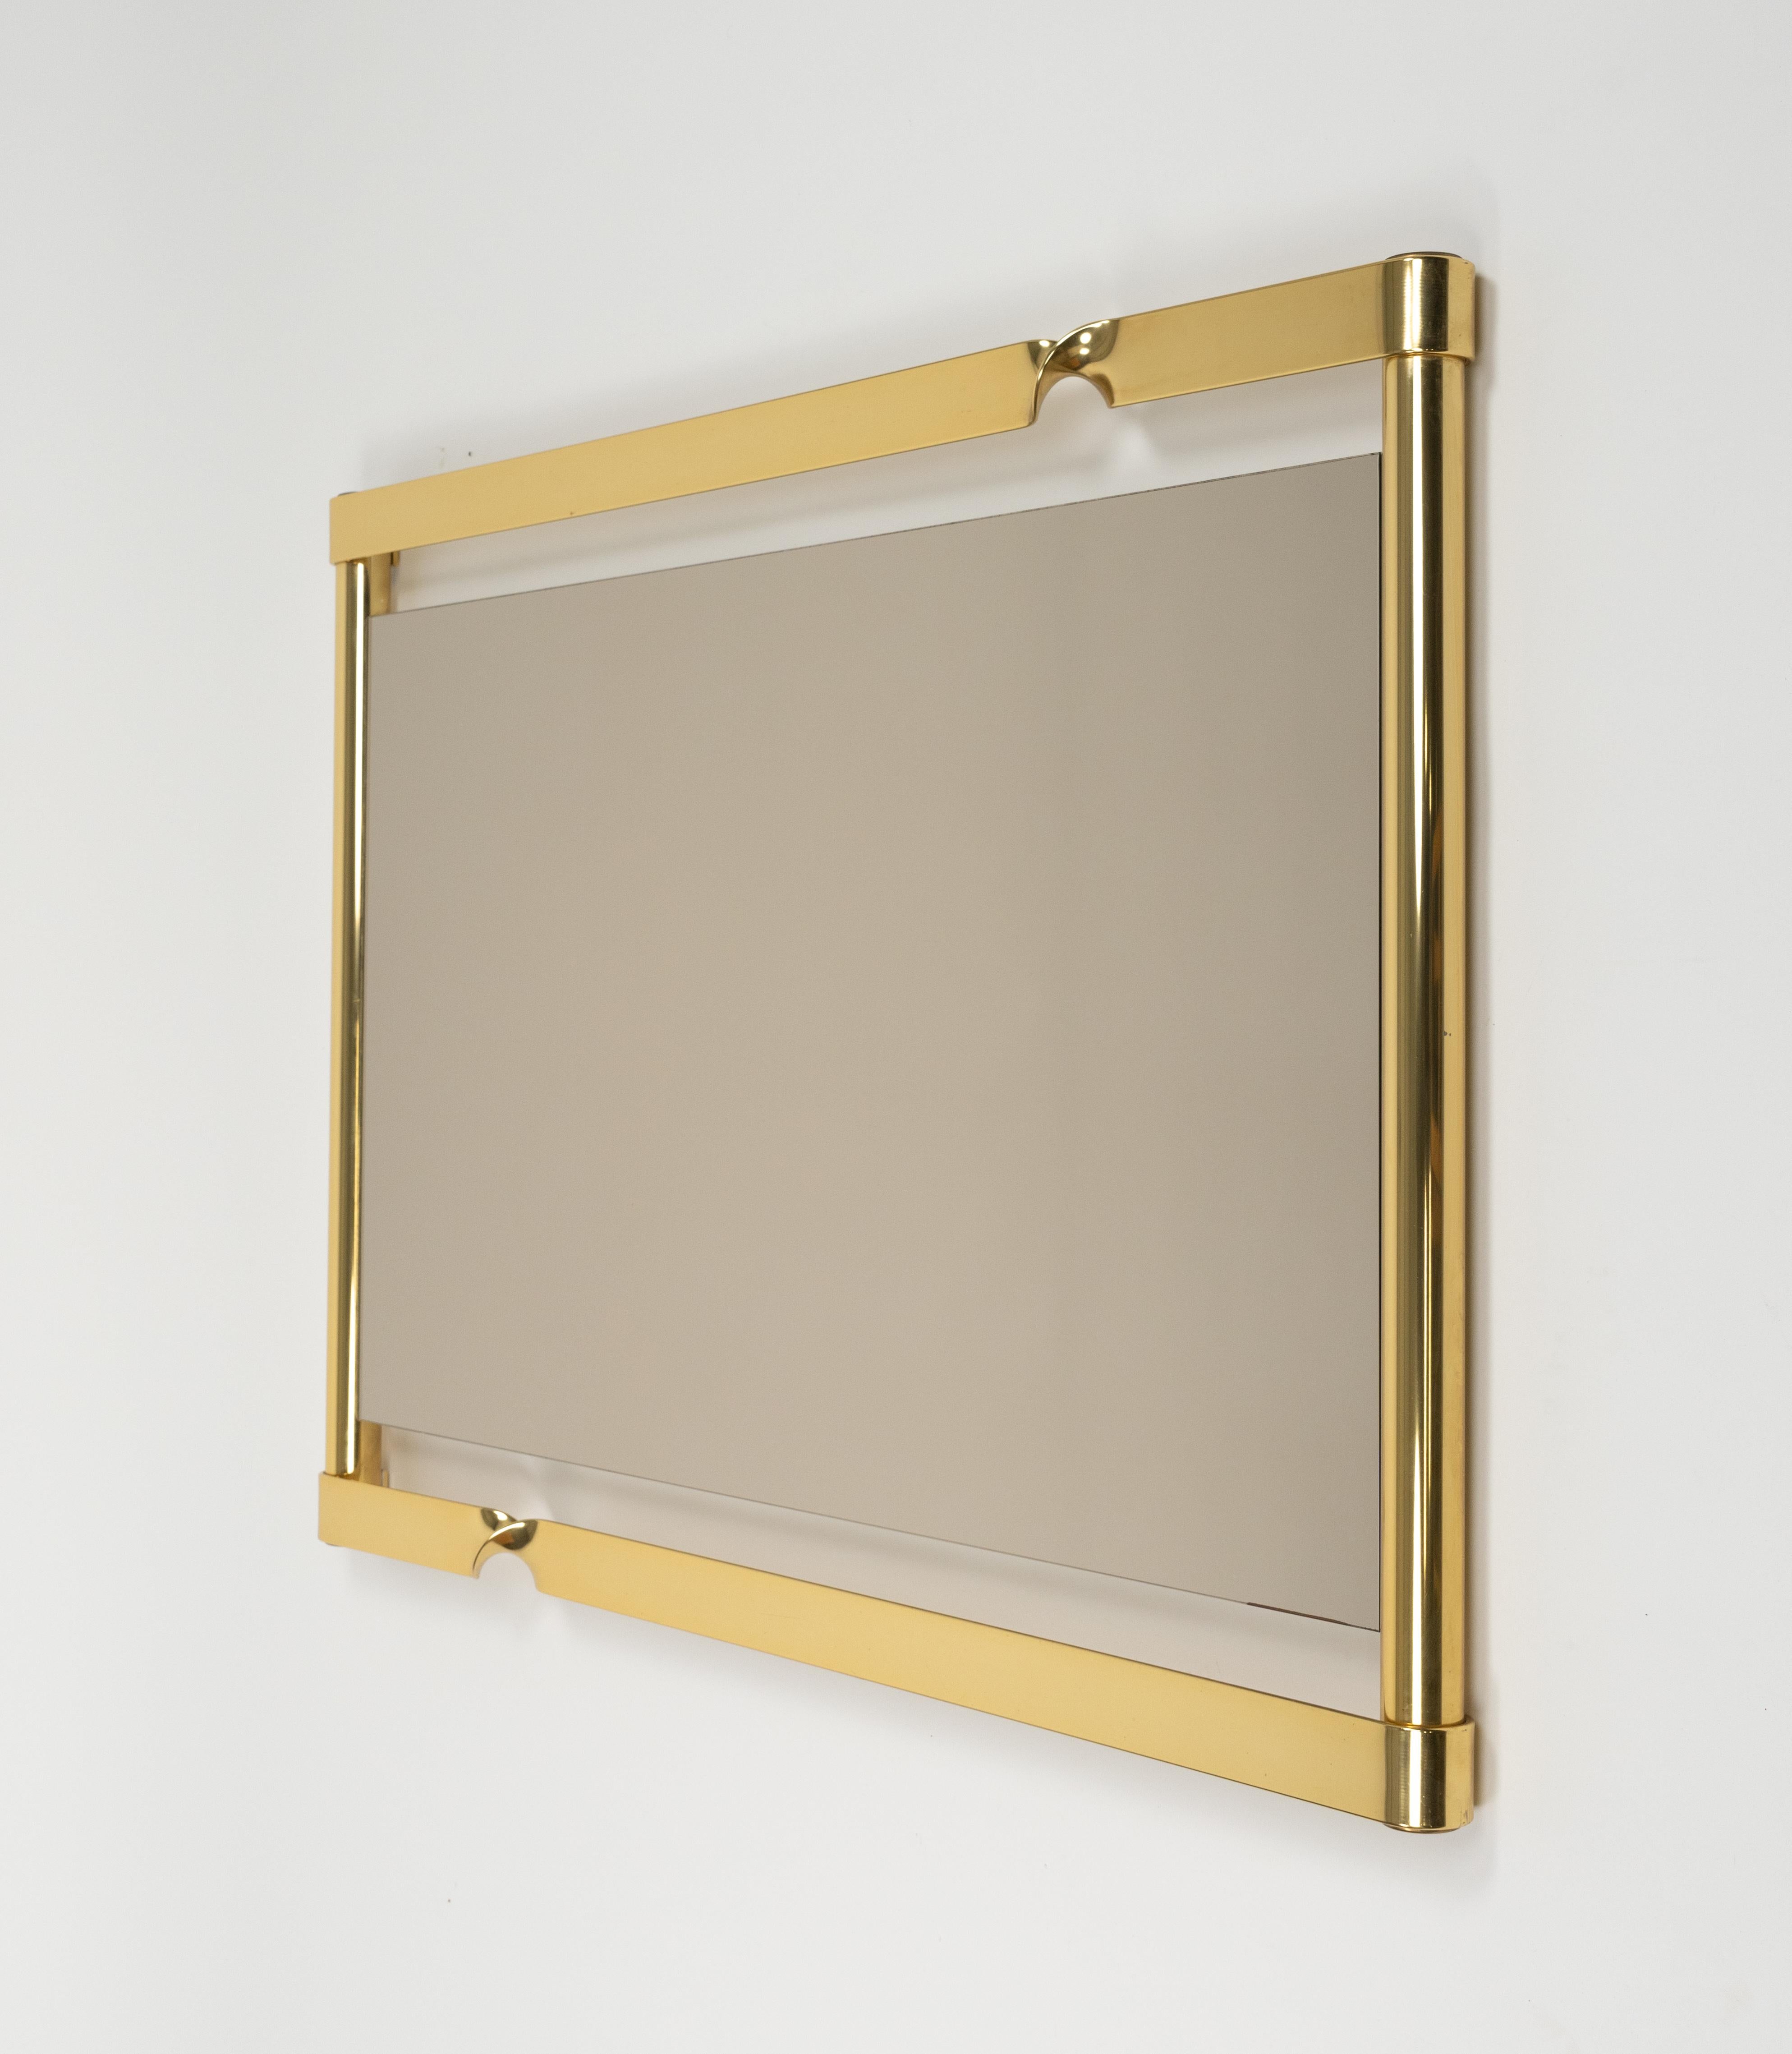 Late 20th Century Midcentury Wall Mirror with Golden Twisted by Luciano Frigerio, Italy 1970s For Sale